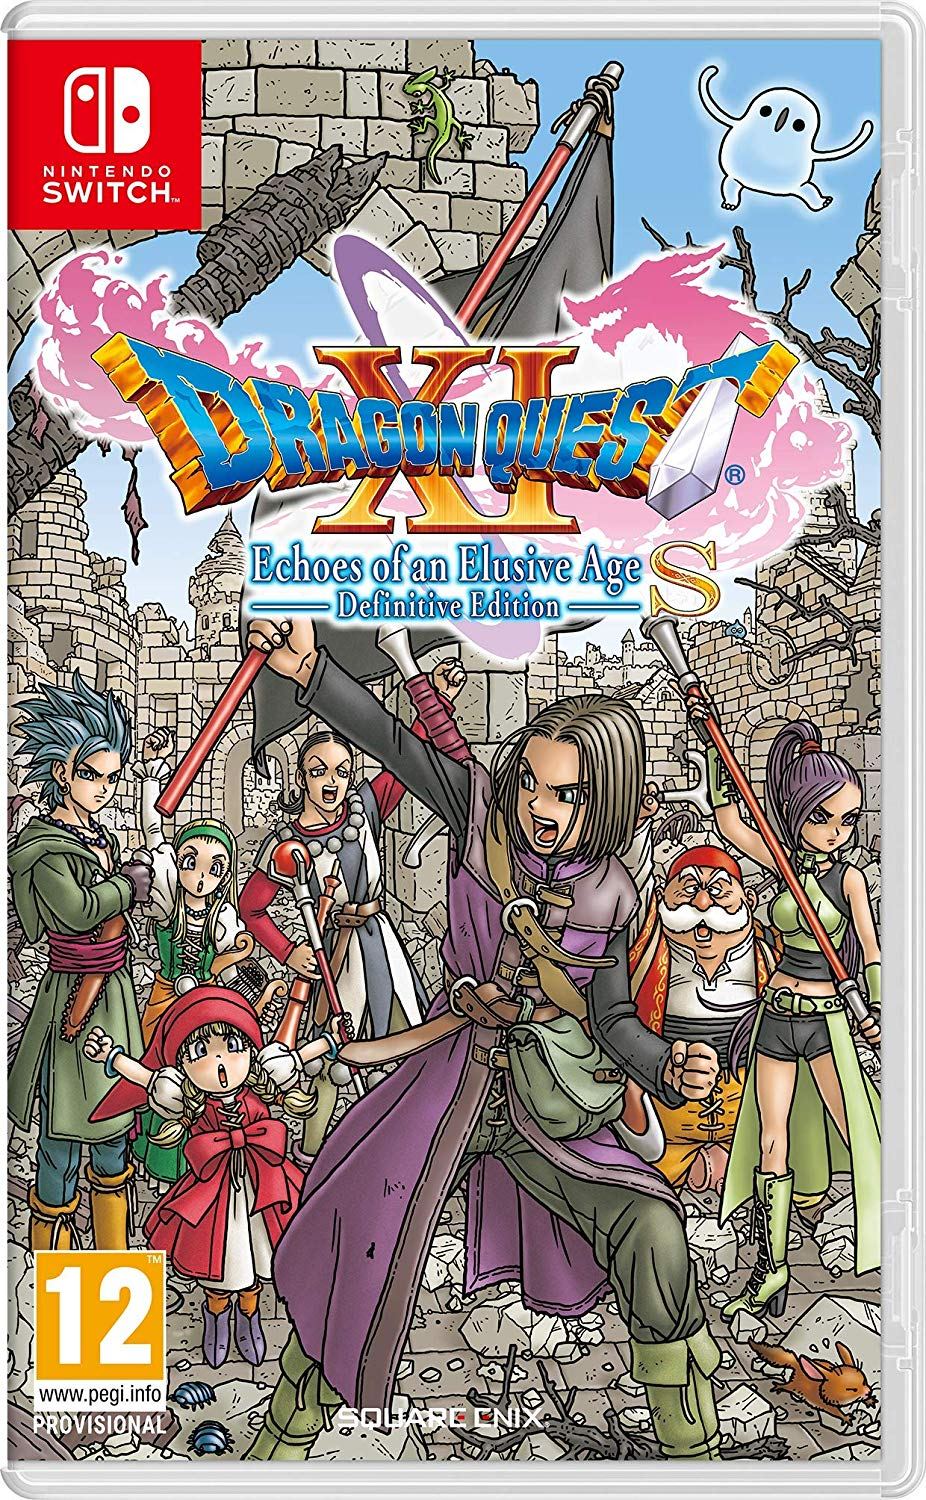 DRAGON QUEST XI S: Echoes of an Elusive Age - Definitive Edition demo